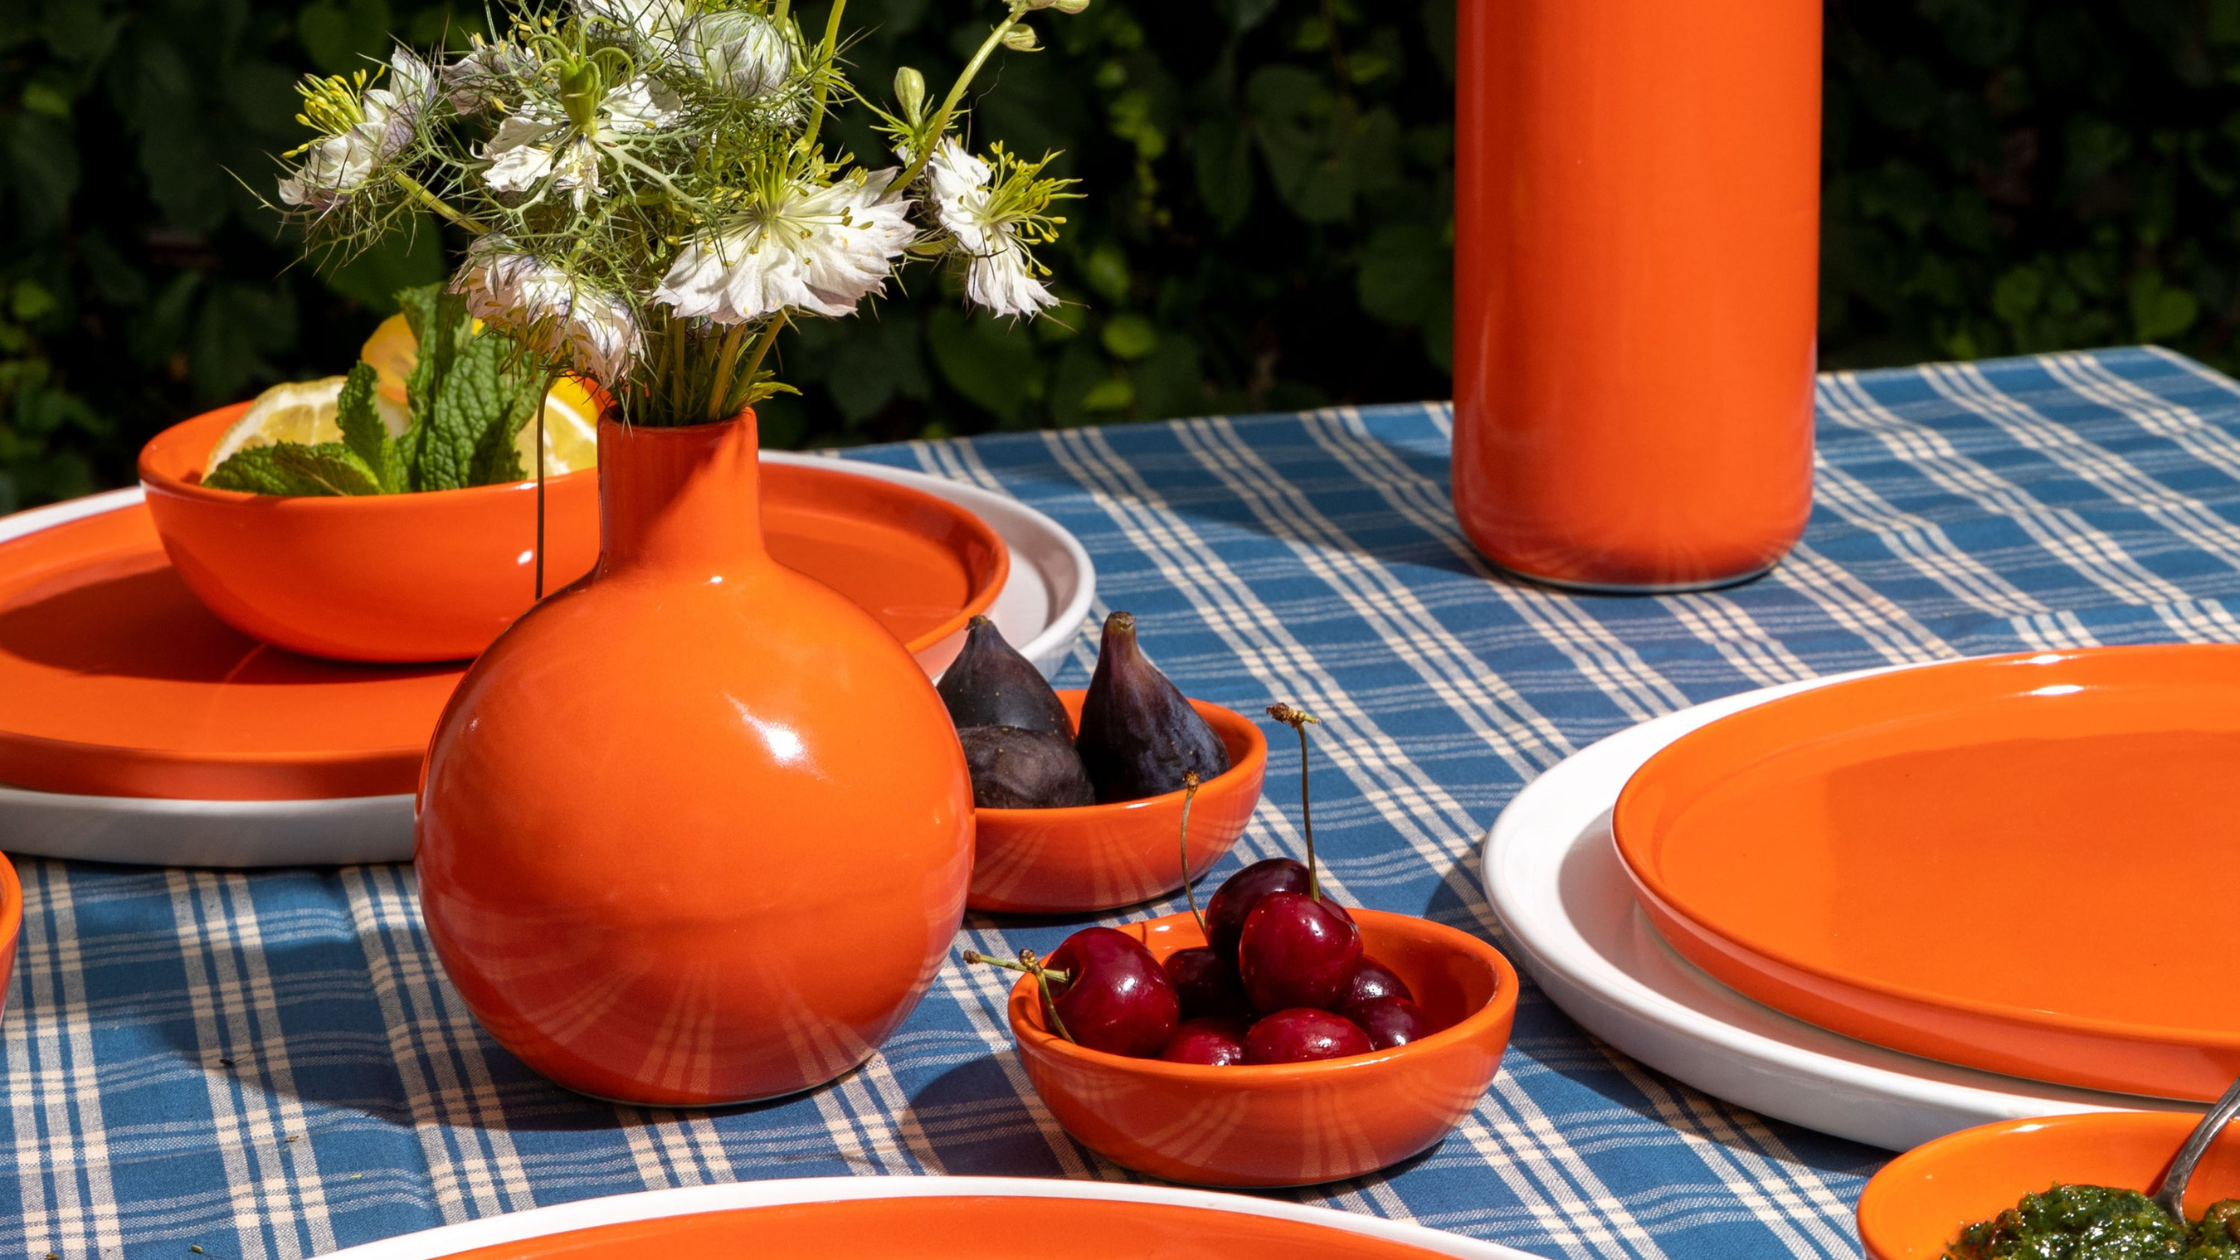 Brightly colored handmade pottery set on a summer table.